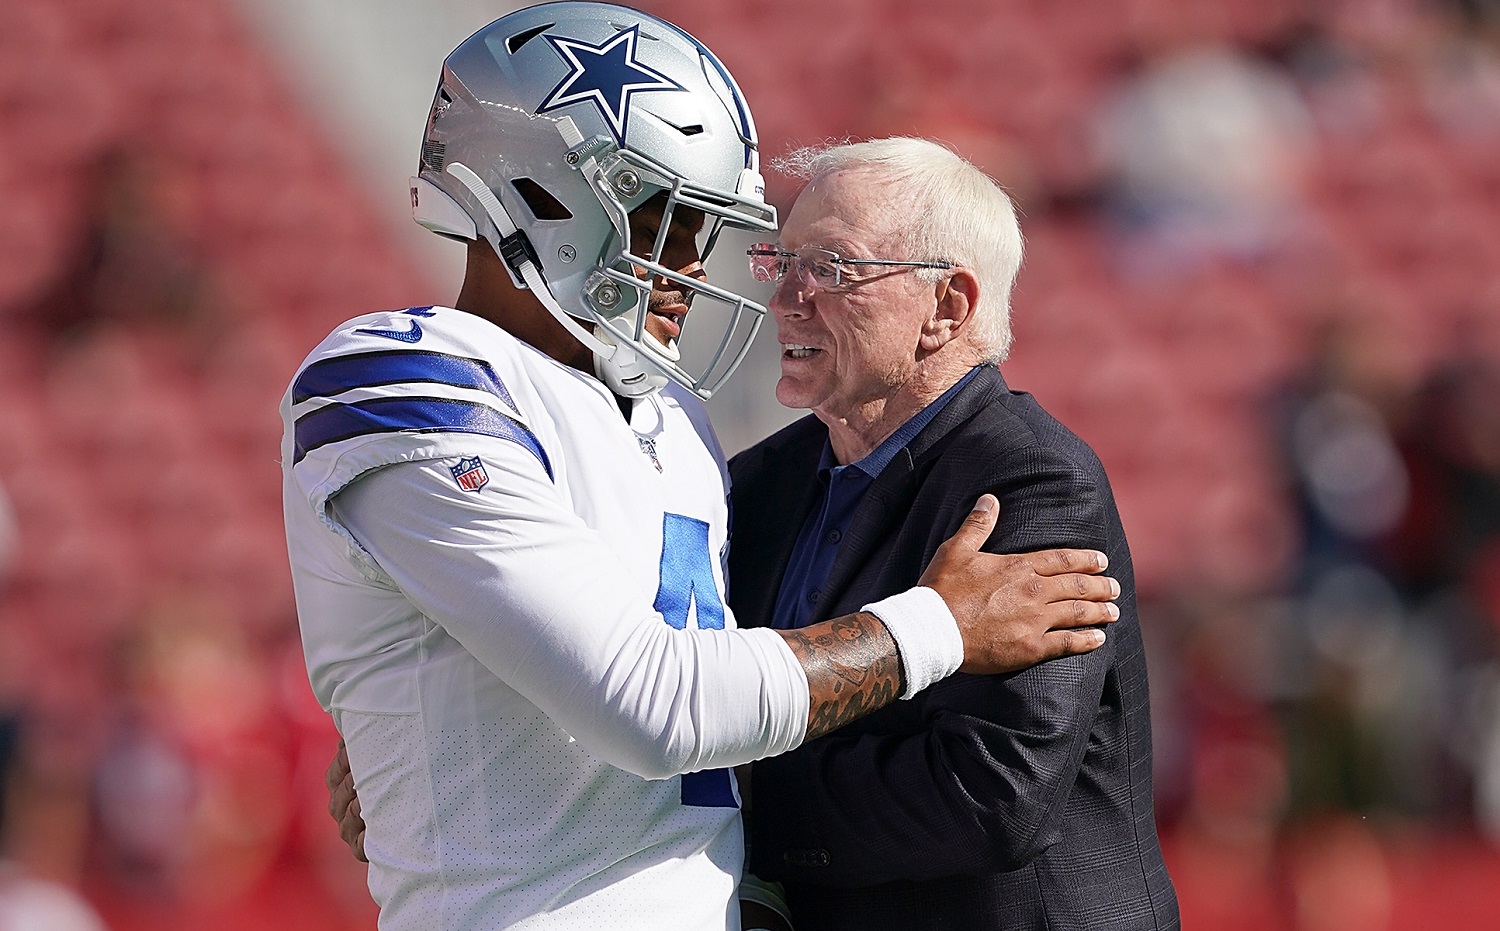 Dak Prescott and Jerry Jones have contract issues to work out, but the Cowboys also ave to worry about a No. 2 quarterback.